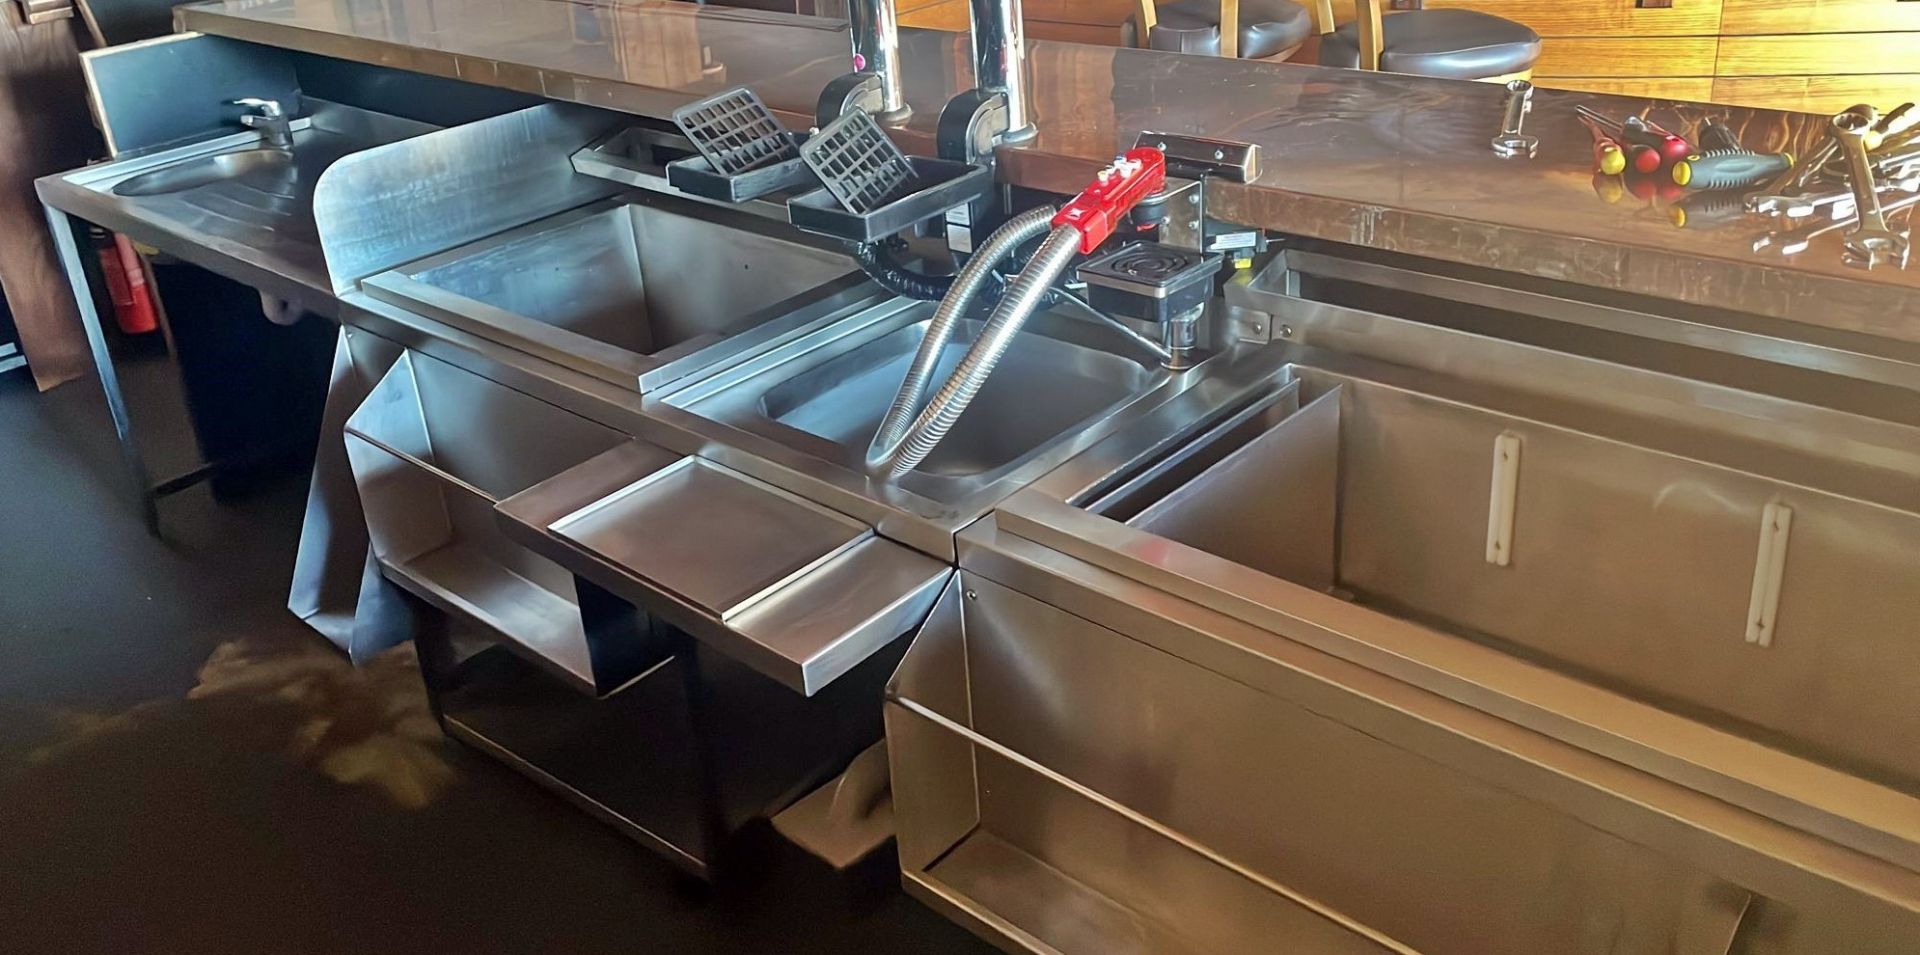 4 x Large Stainless Steel Backbar Units Including an Icewell With Speed Rail and Handwash Basin, - Image 2 of 8